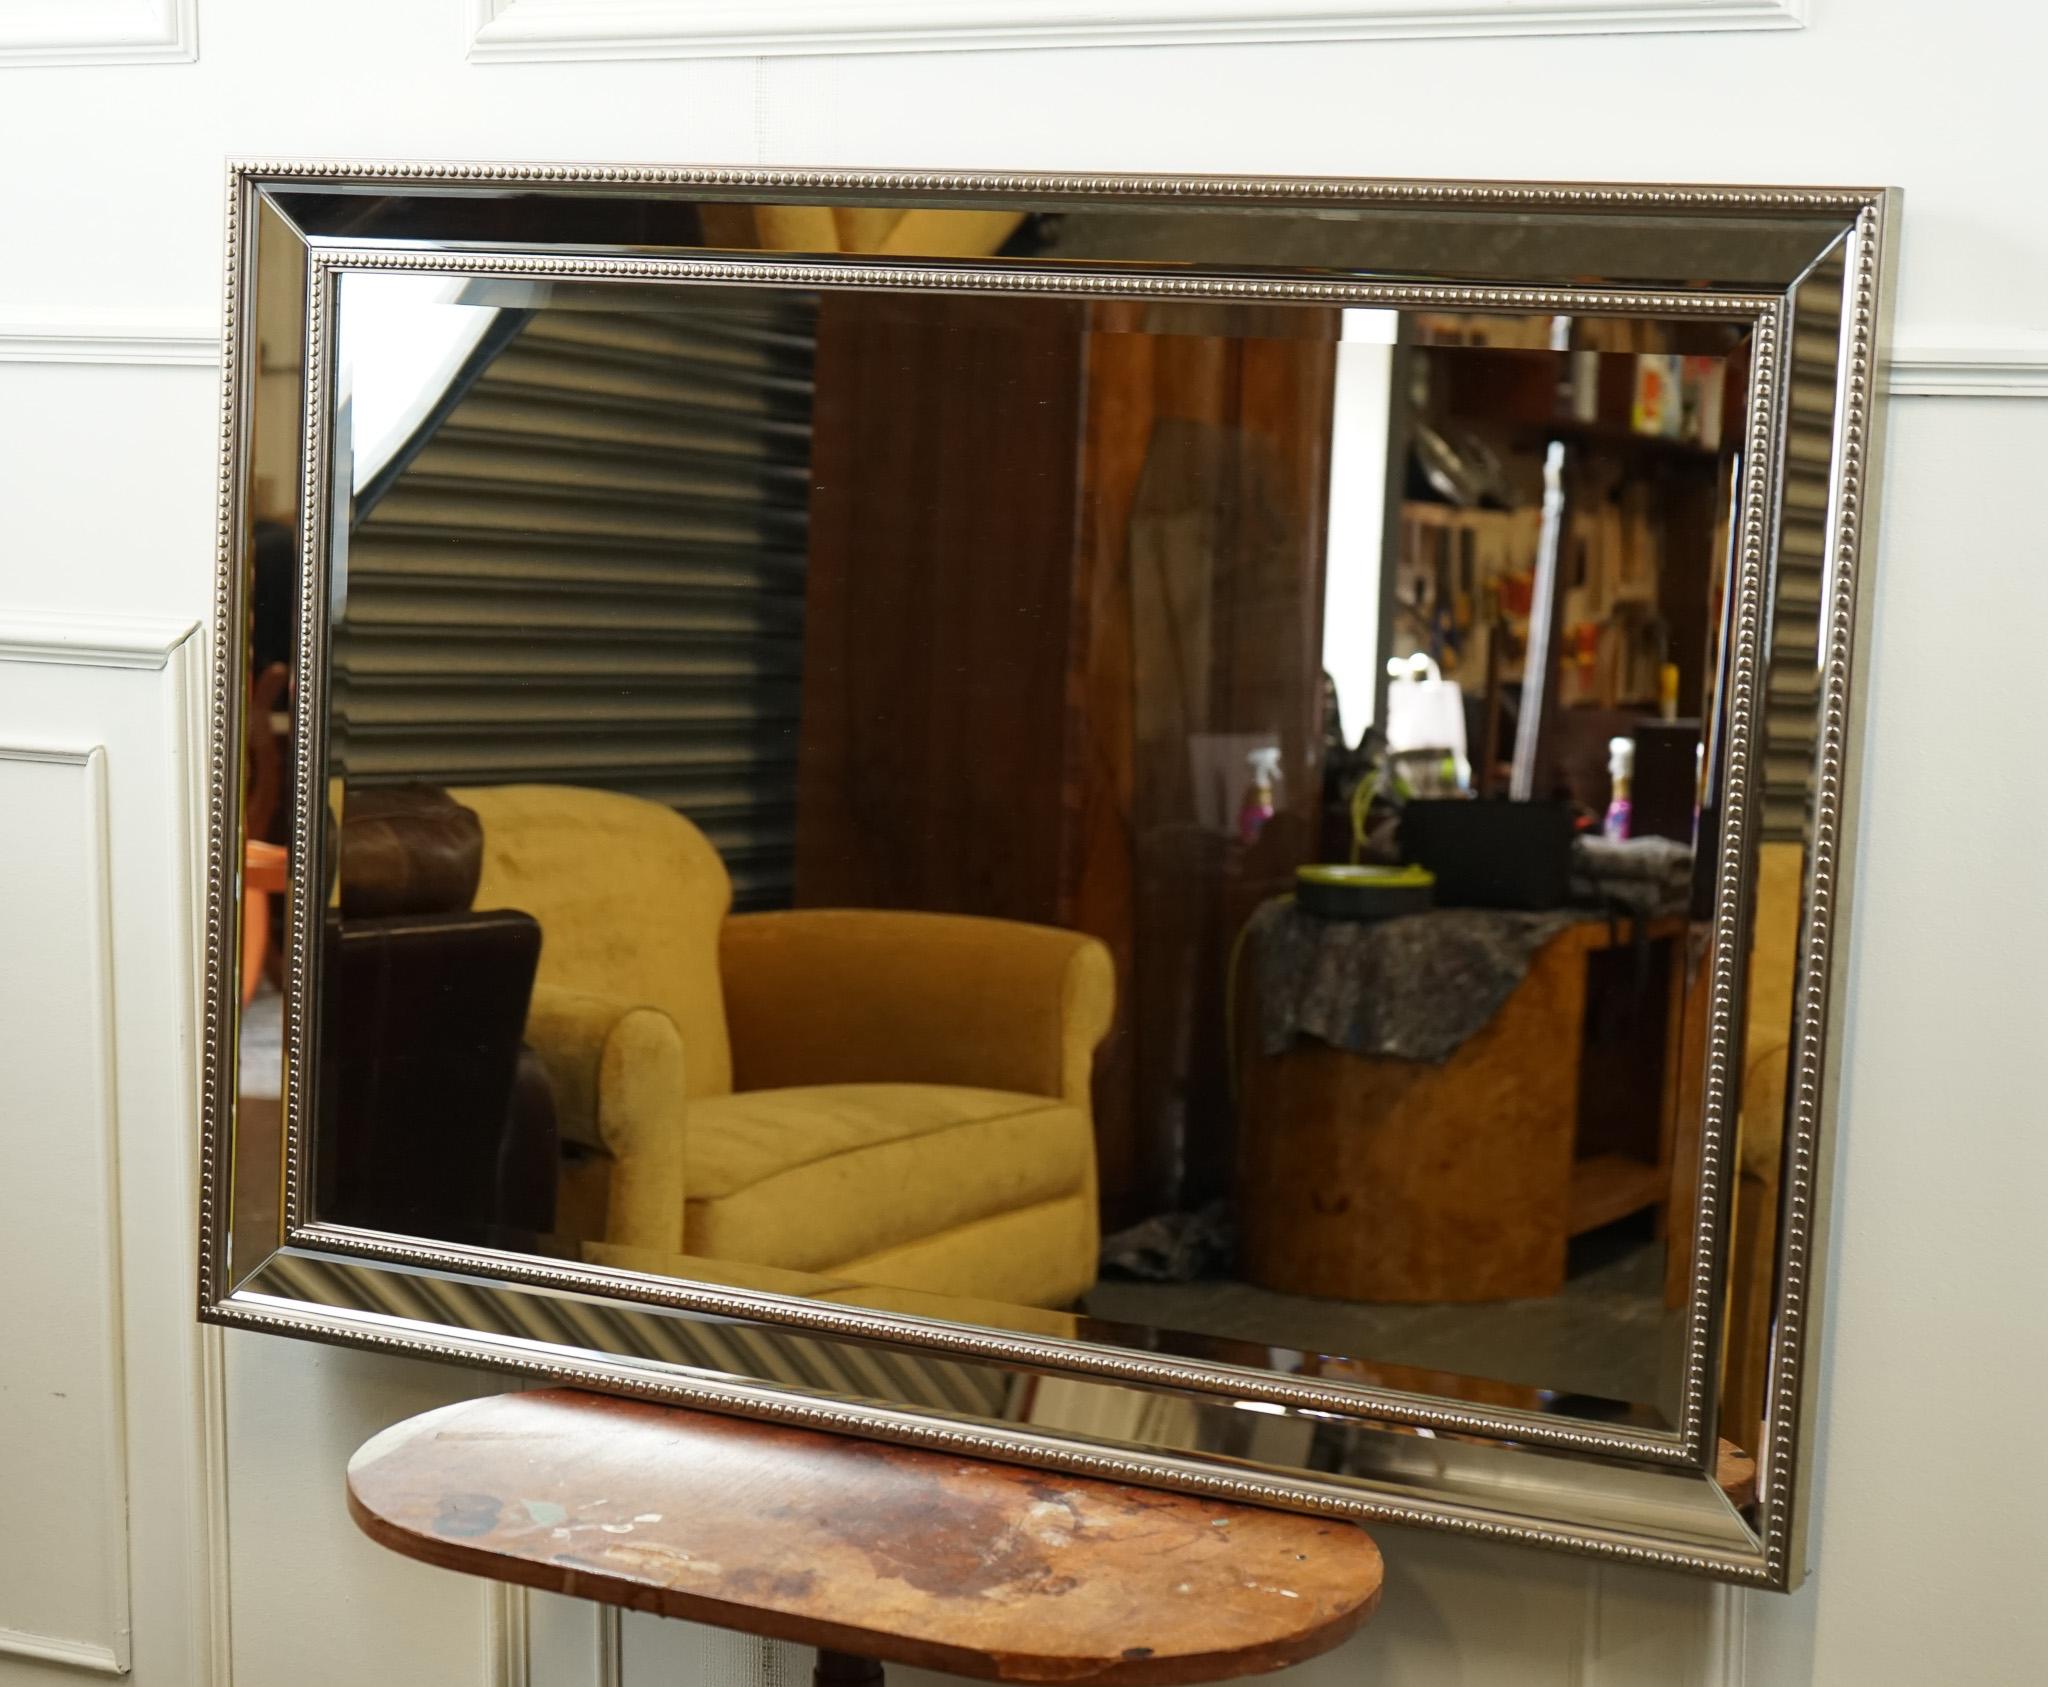 Antiques of London



We are delighted to offer for sale this Stunning Silver Bevelled With Silver Beads Mirror.

A modern bevelled mirror with silver beads going around the frame in a straight line is a contemporary and stylish piece that adds a